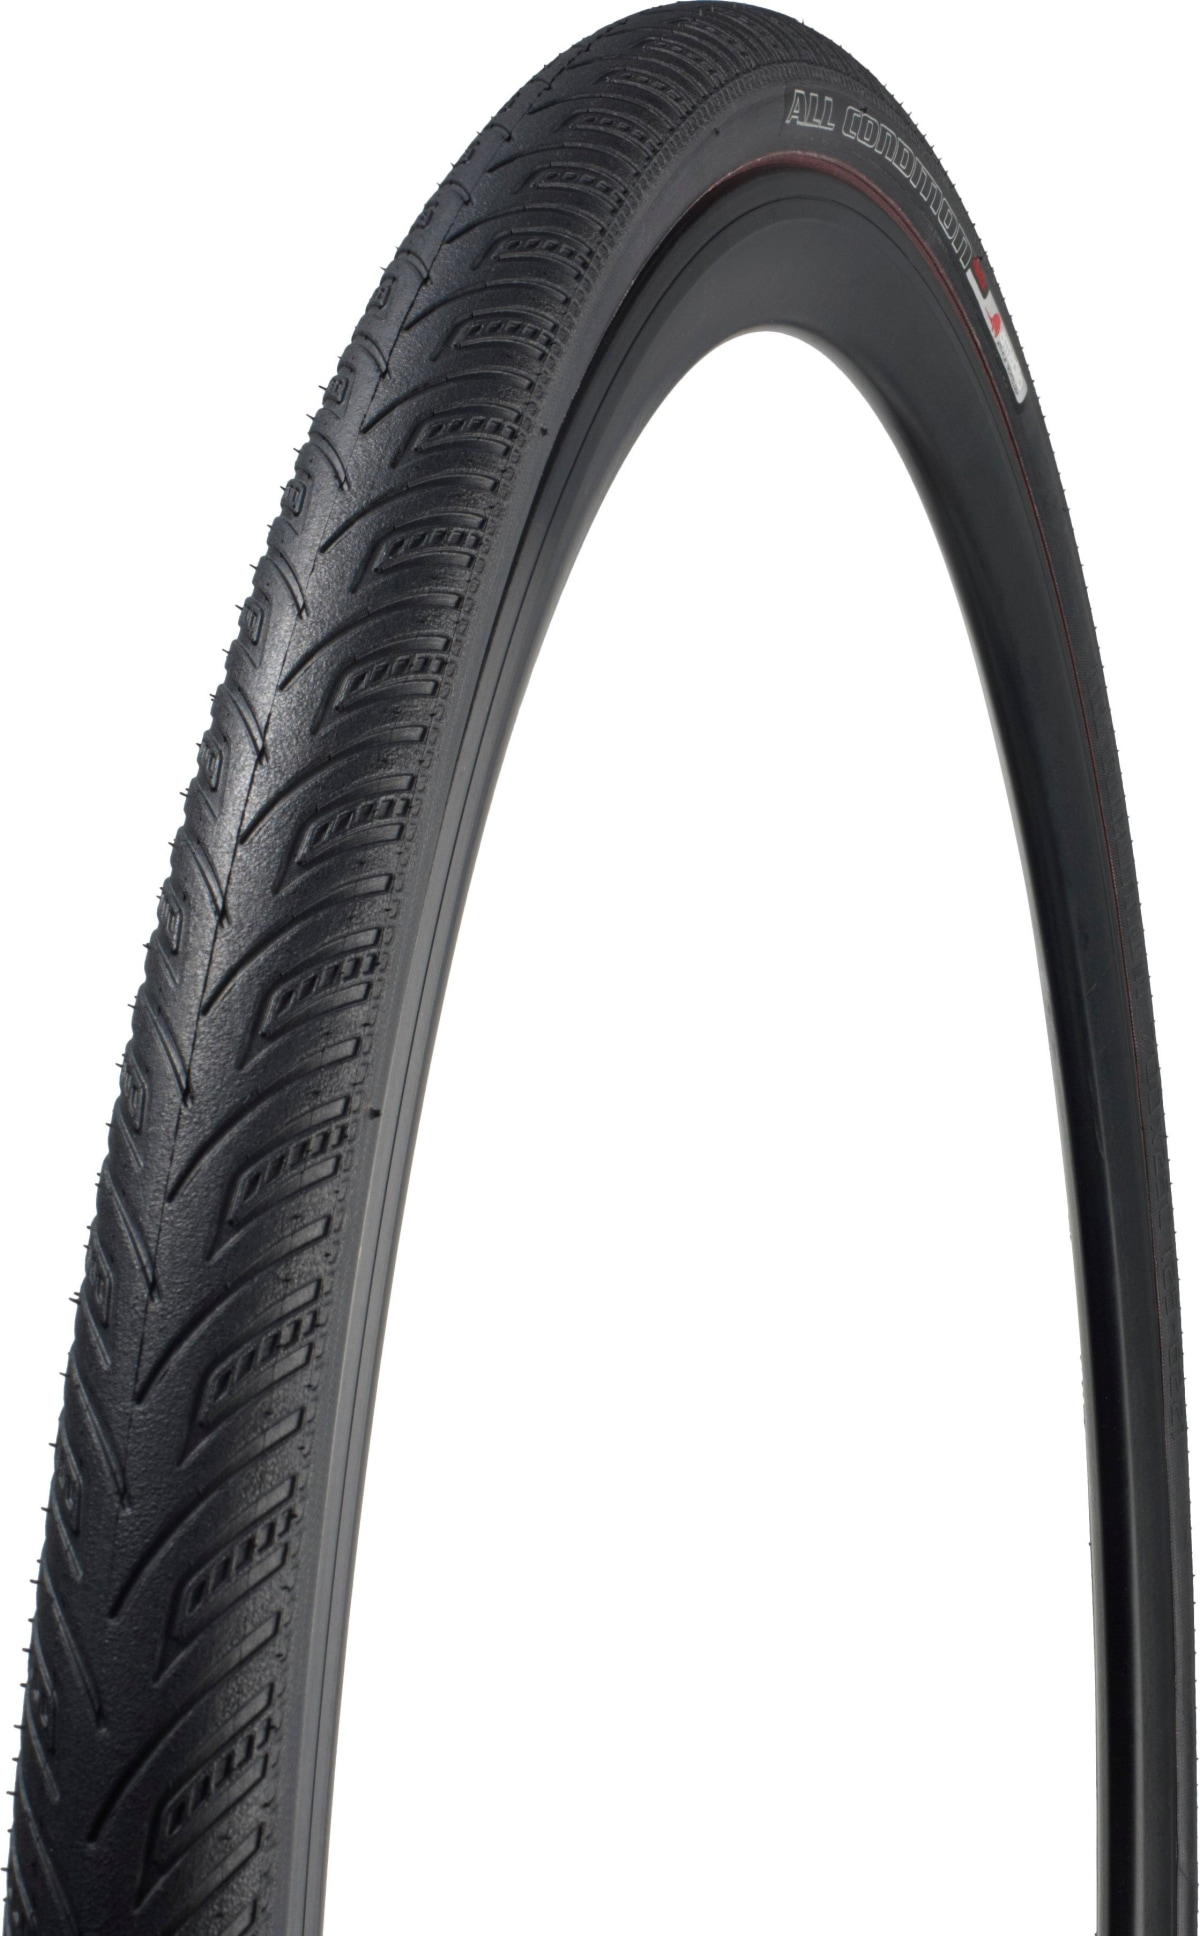 Specialized  All Condition Armadillo Road Tyres 700 X 25 Black